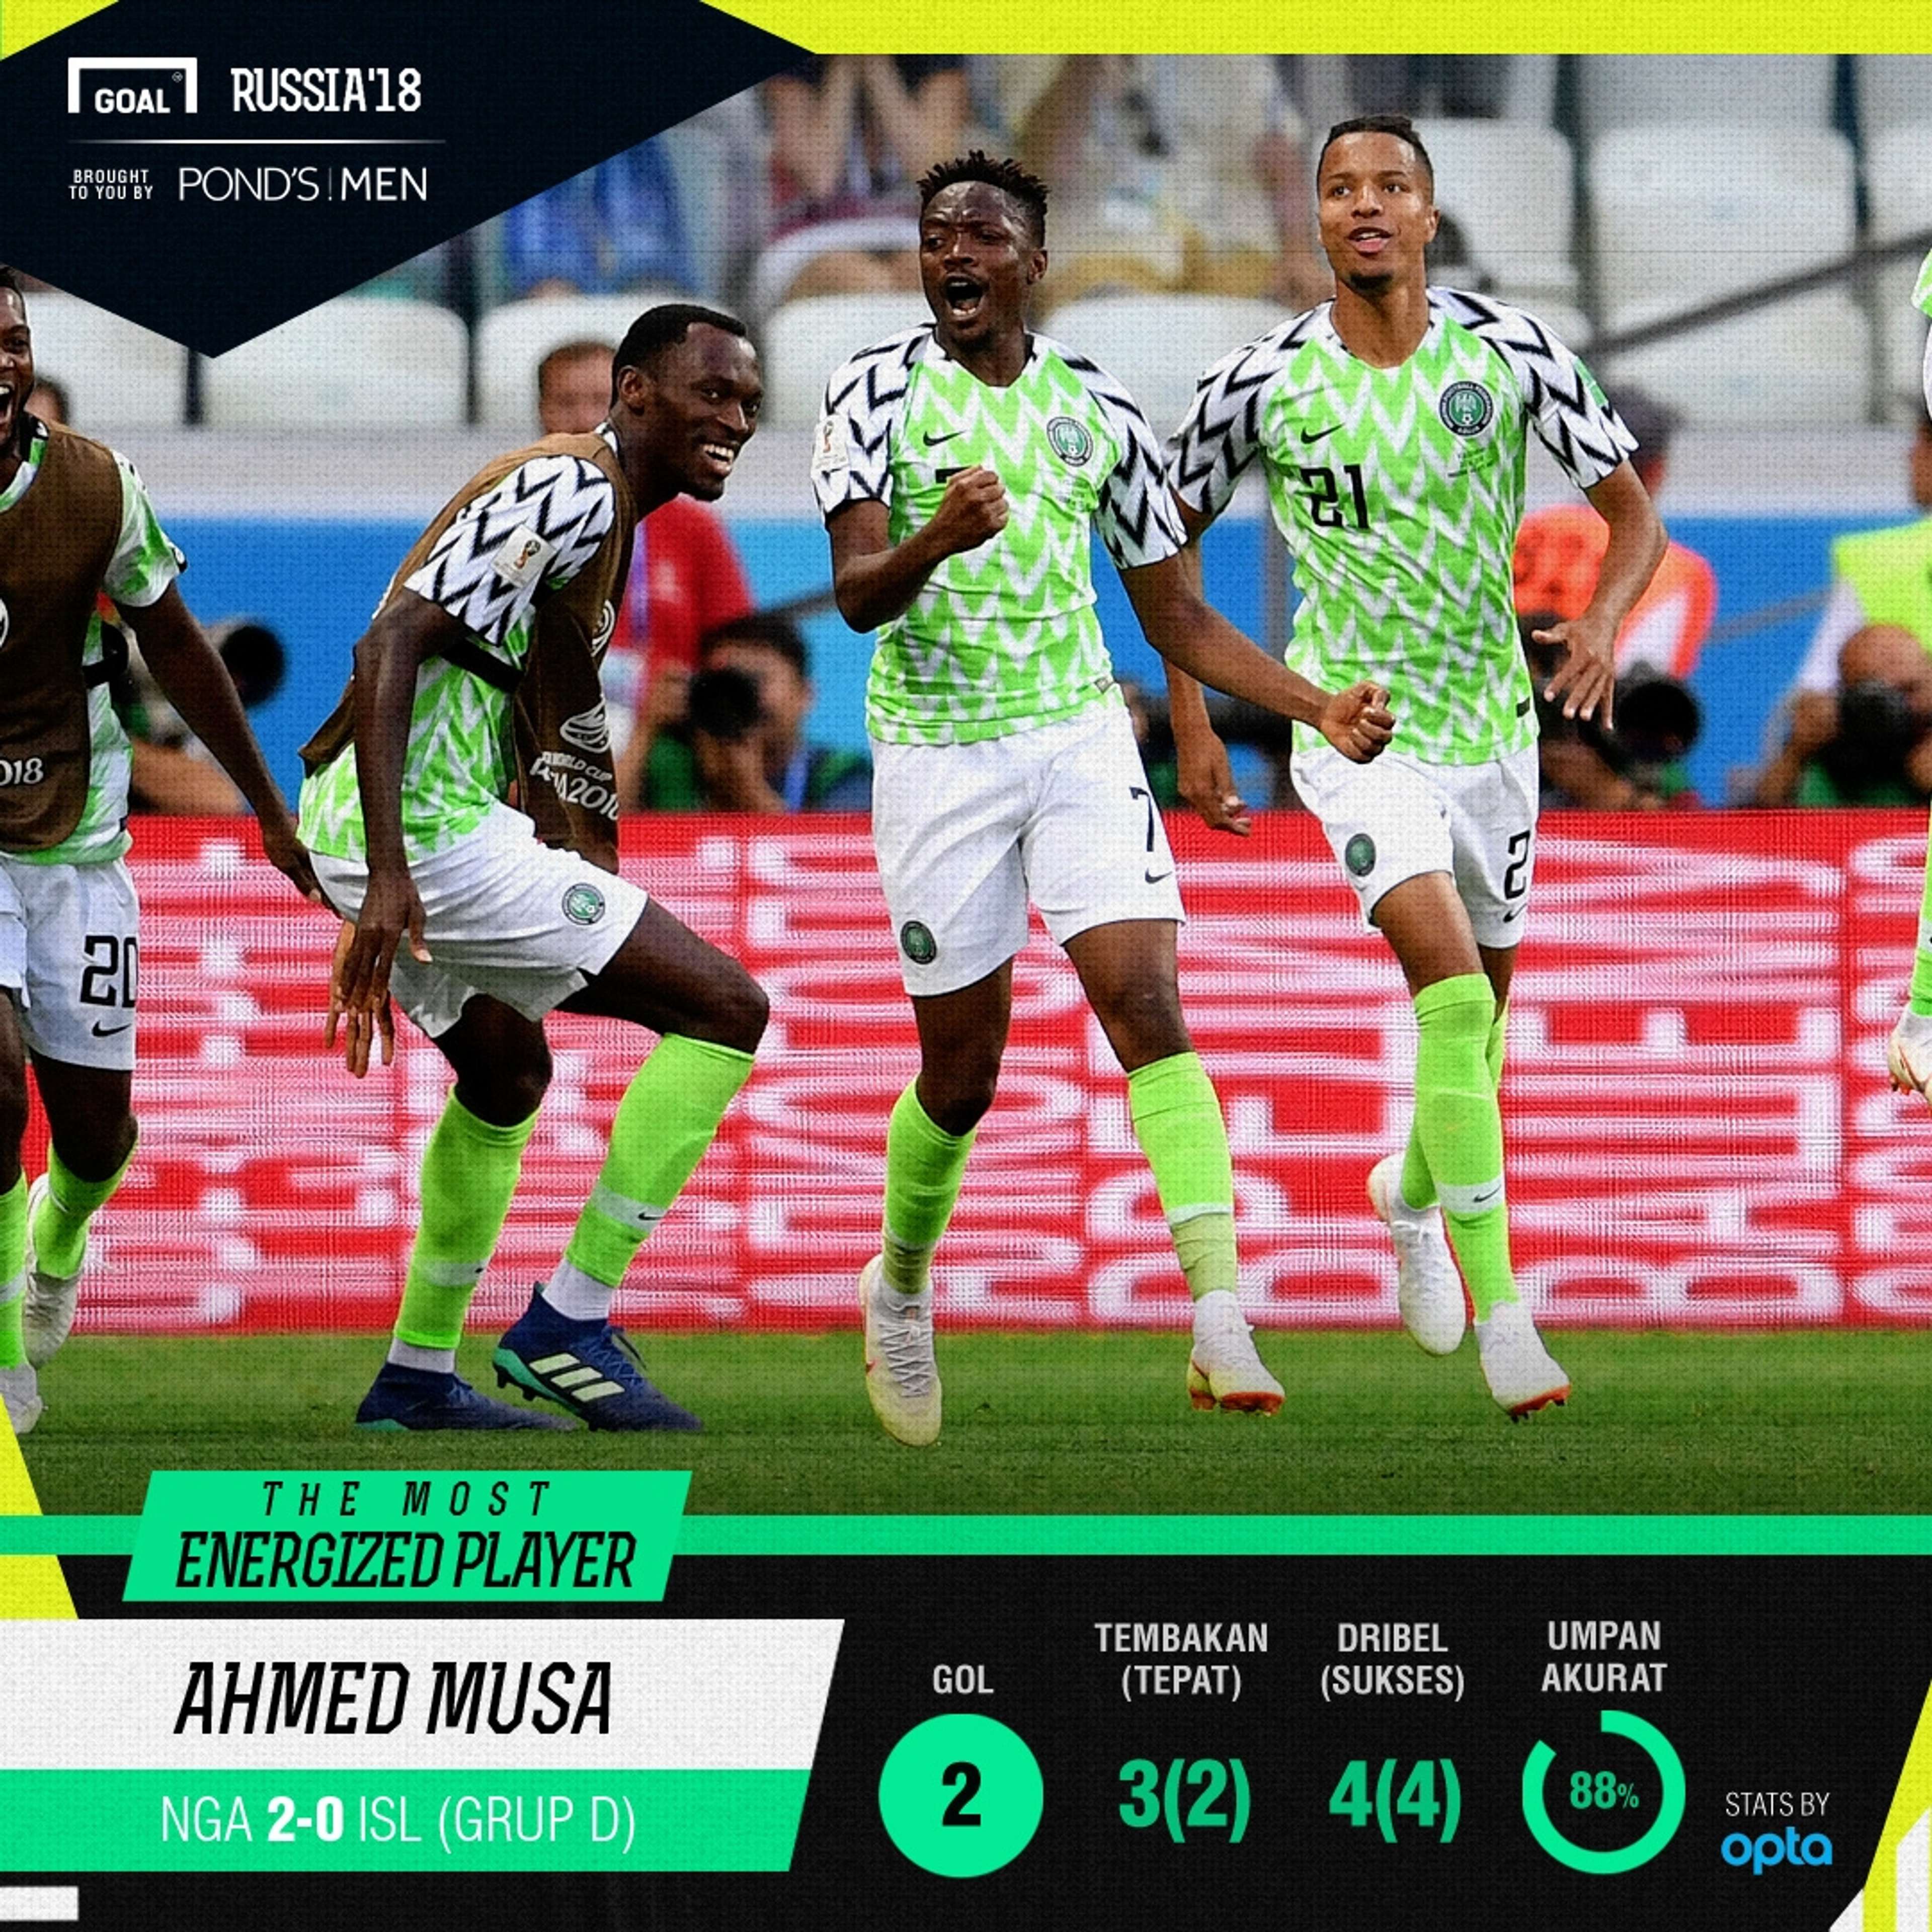 Ponds - Most Energizing Player - Ahmed Musa